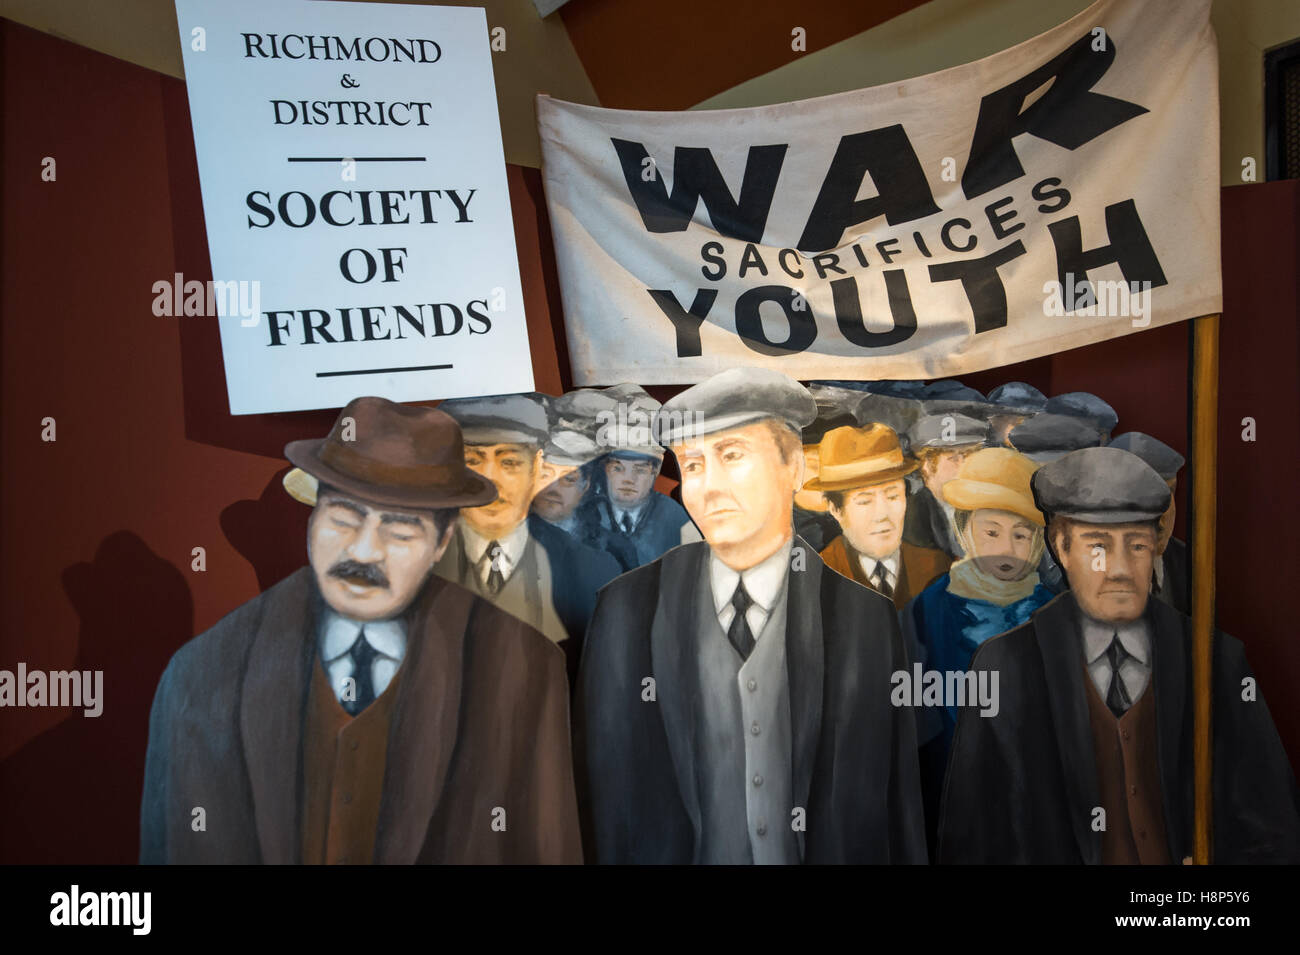 UK, England, Yorkshire, Richmond - A display for the Society of Friends against war in the city of Richmond located in Northern Stock Photo